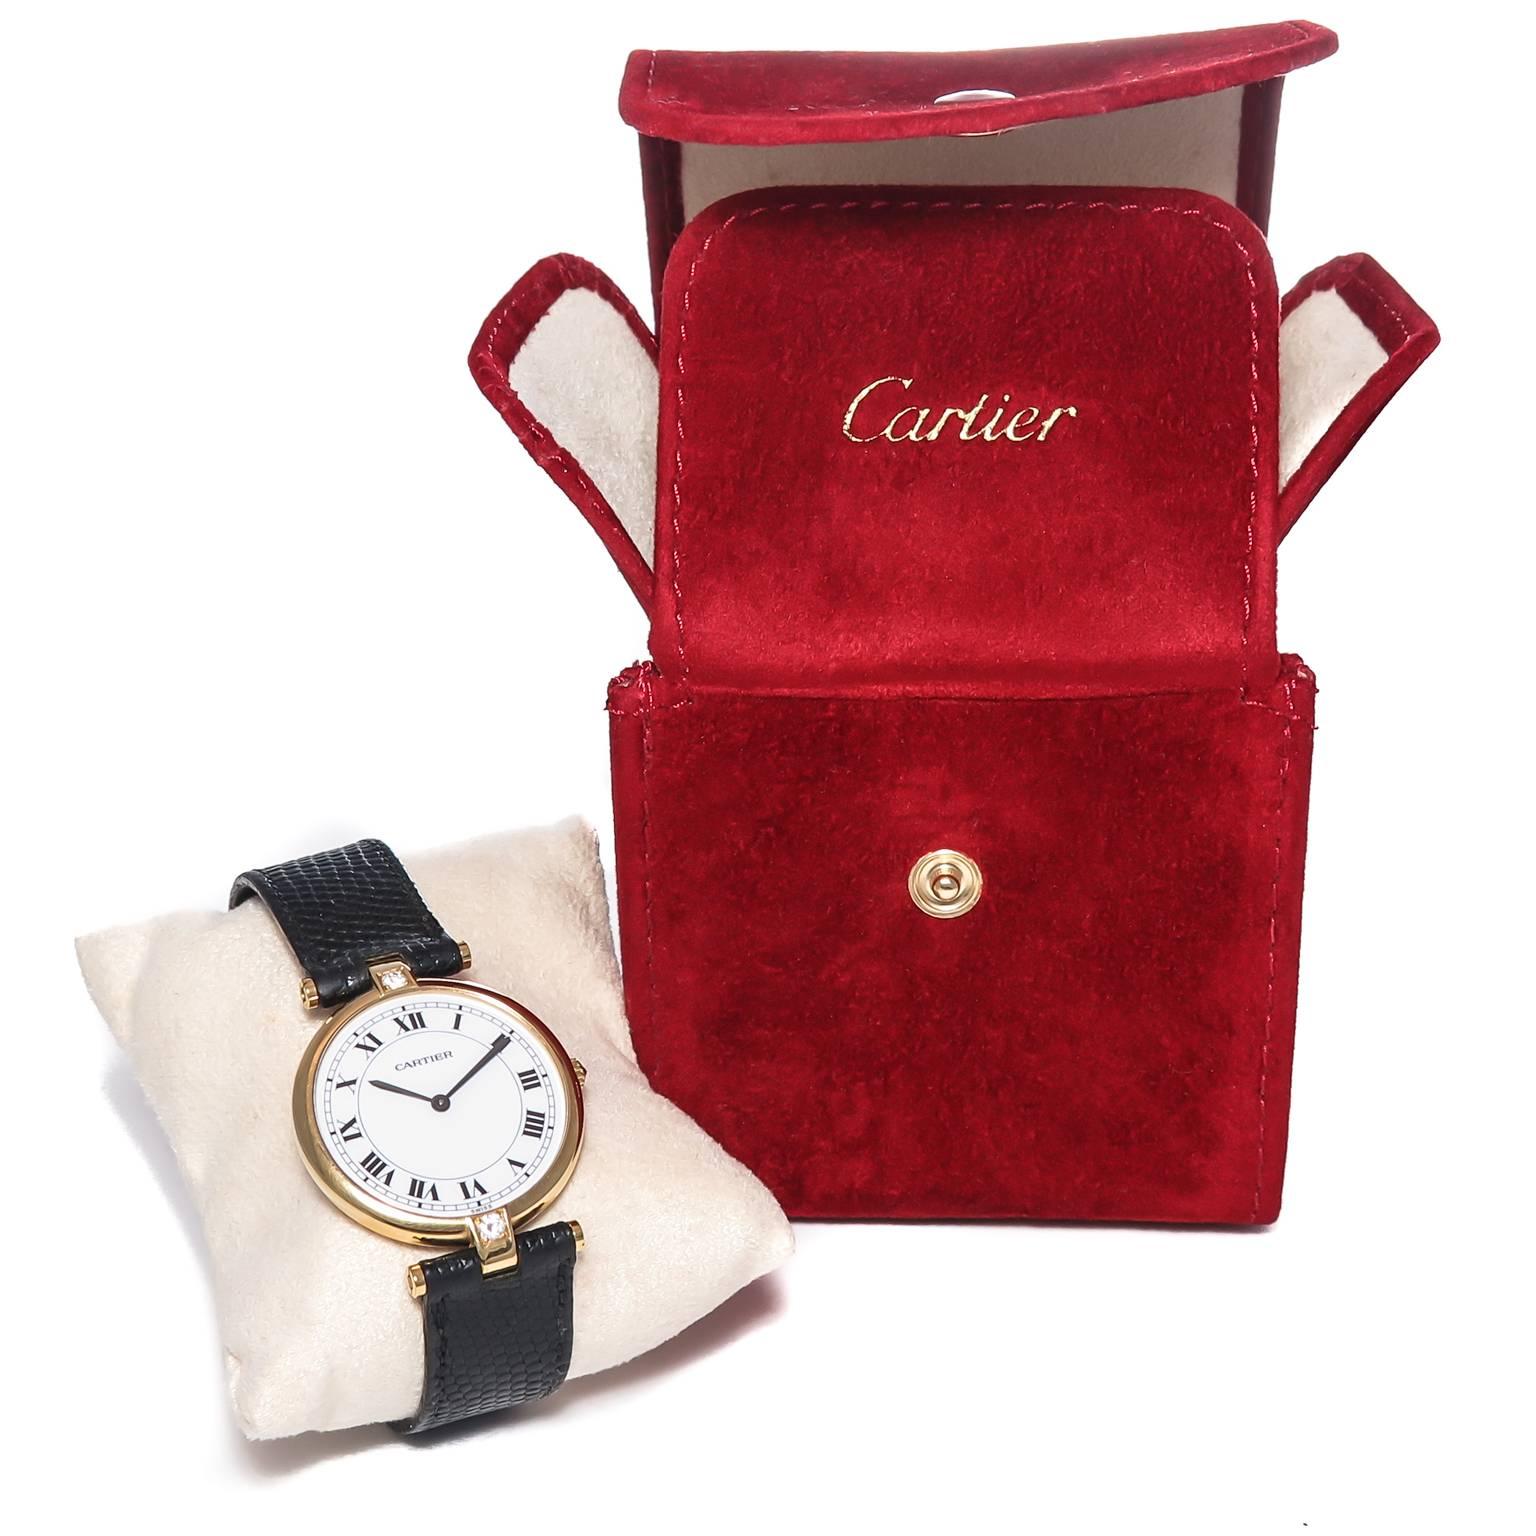 Circa 2000 Cartier Vendome Collection Wrist Watch, 30 MM 18K Yellow Gold case set with a Diamond at each end of the case as well as as a Diamond set in the crown. Quartz Movement, White Dial with Black Roman Numerals. Original Cartier Black Lizard